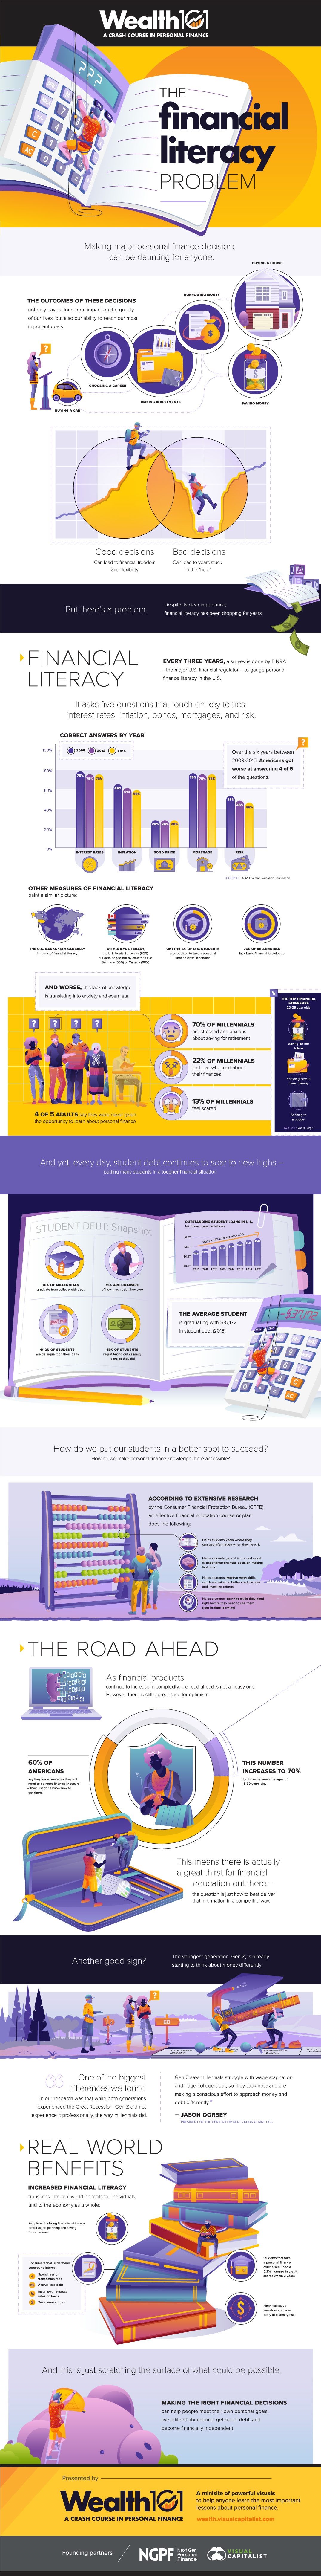 The Financial Literacy Problem #infographic